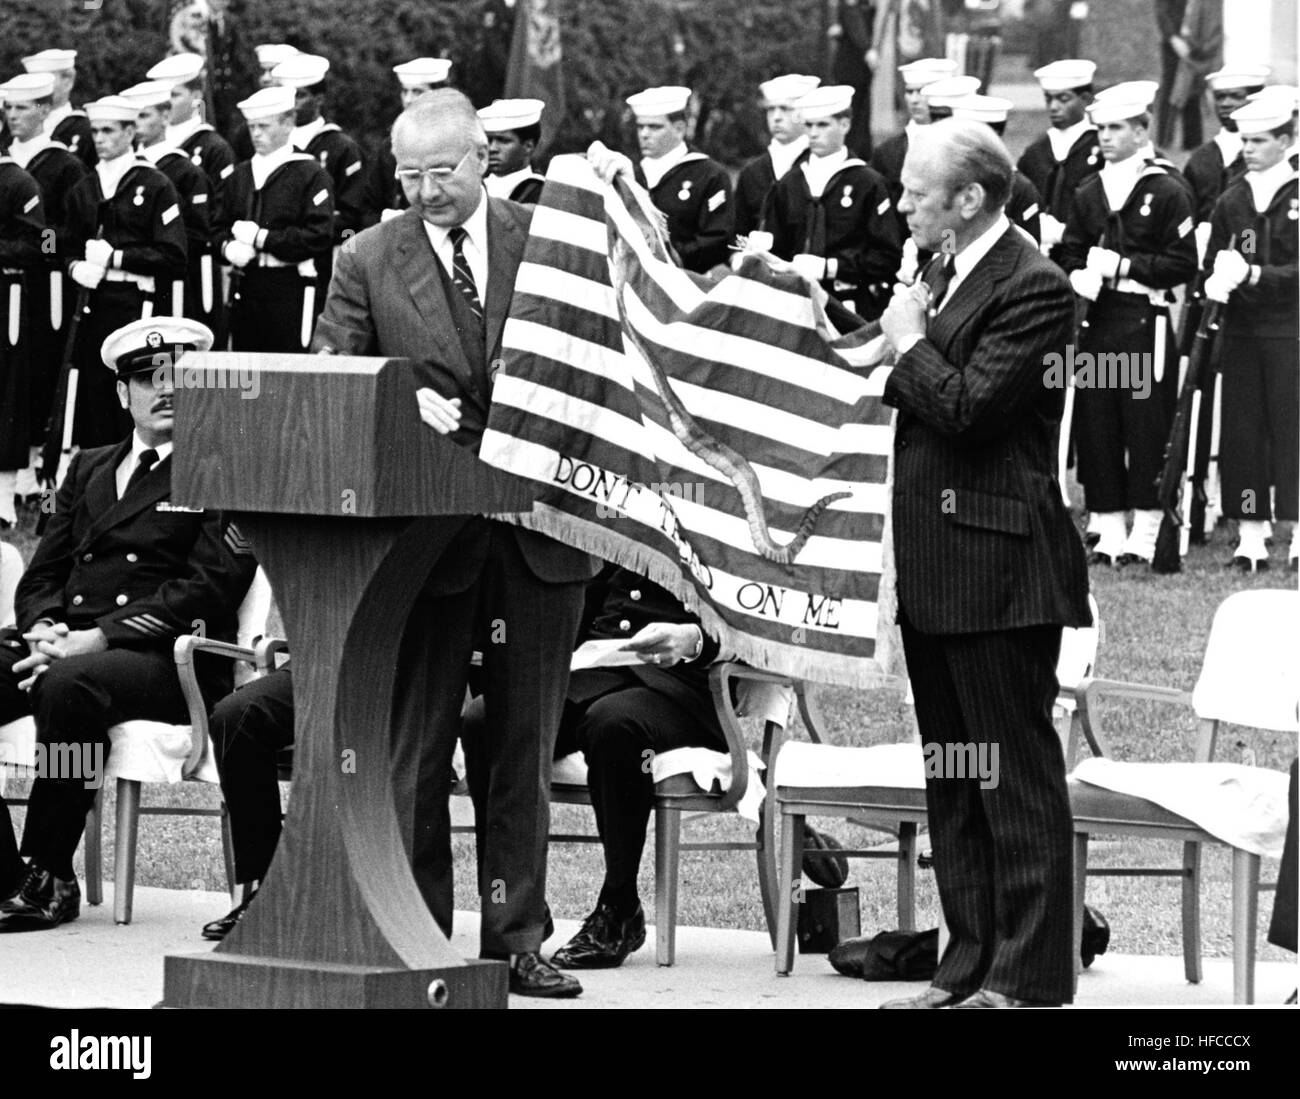 751029-N-ZZ999-101 WASHINGTON (Oct. 29, 1975) President Gerald R. Ford receives the prototype of the ceremonial Continental Navy Jack from Secretary of the Navy J. William Middendorf, II during a ceremony in Washington. A smaller version of the flag was flown from the jack staff of every U.S. Navy ship in December 1976 as part of the Navy's Bicentennial Celebration. (U.S. Navy photo by Chief Journalist Richard Montgomery/Released) Middendorf-Ford Flag (751029-N-ZZ999-101) Stock Photo